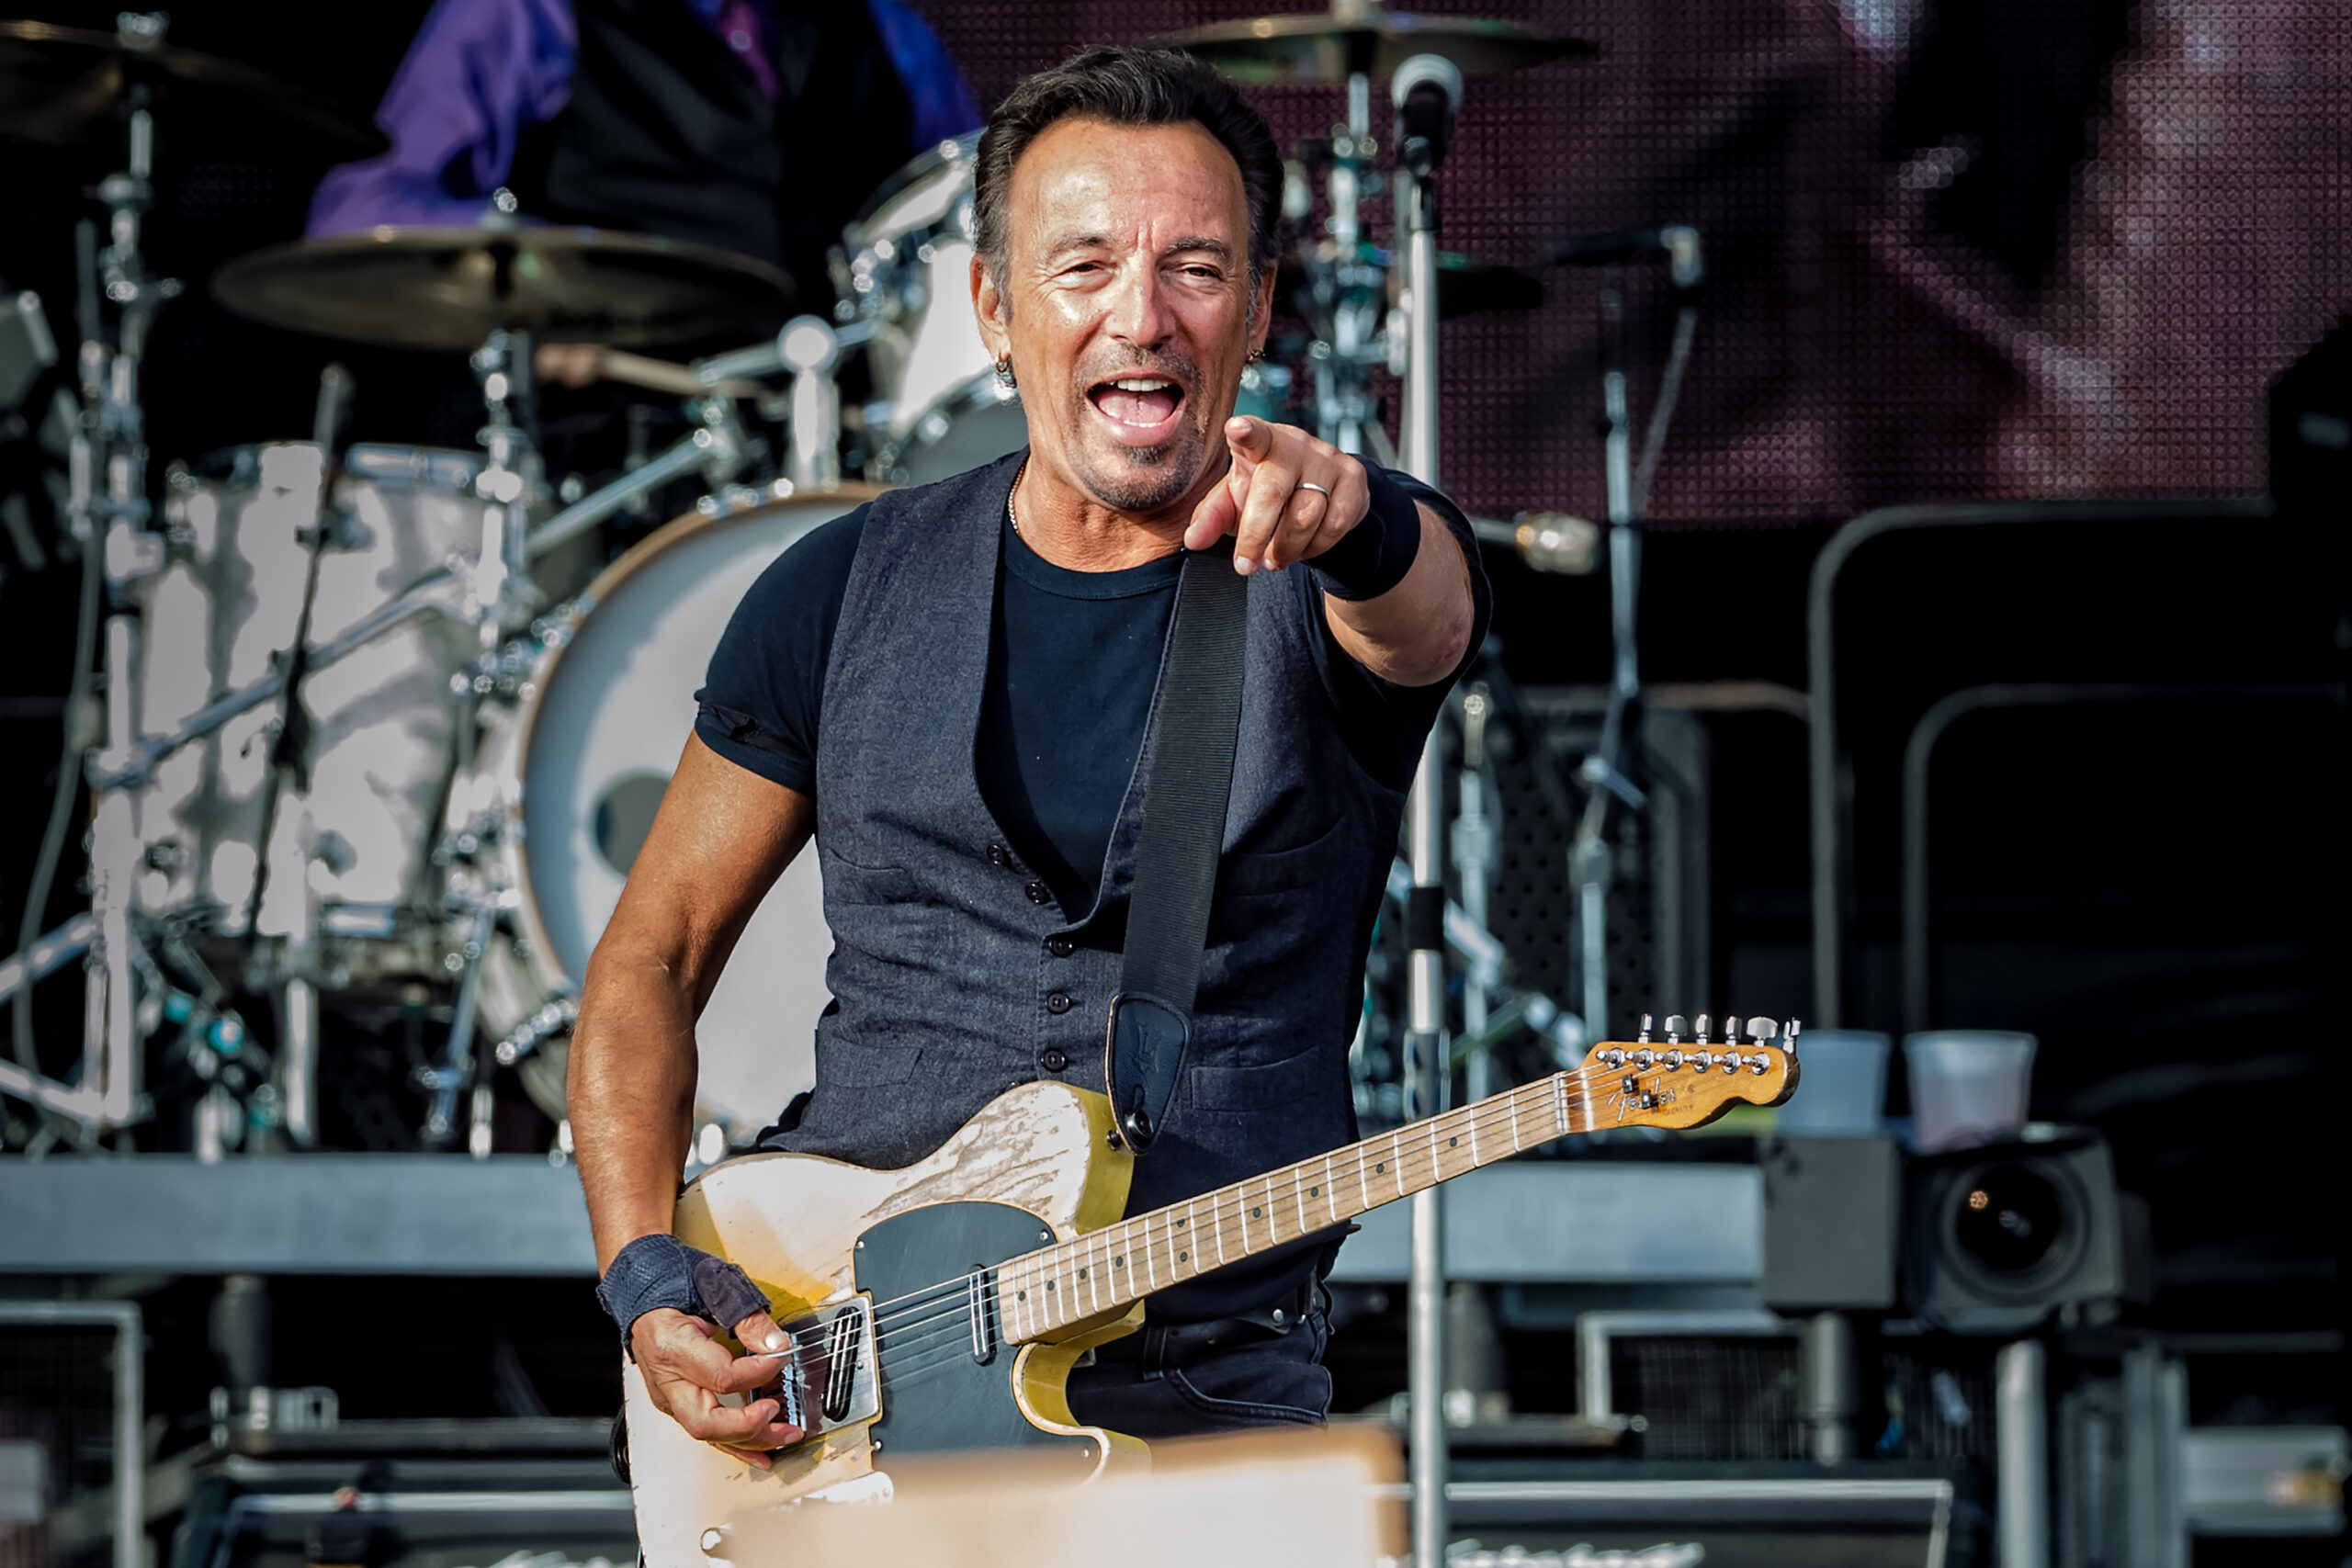 <p>The tickets for the Bruce Springsteen tour that started in 2023 reached $5000 per person due to high demand. Although the average ticket price was ‘in the mid-$200 range’, this sparked criticism as many felt it was too expensive, leading to scrutiny of Springsteen and the ticket sales company Ticketmaster. Fans were excited to see Springsteen live, but some were ‘betrayed’ by the pricing policy.</p>